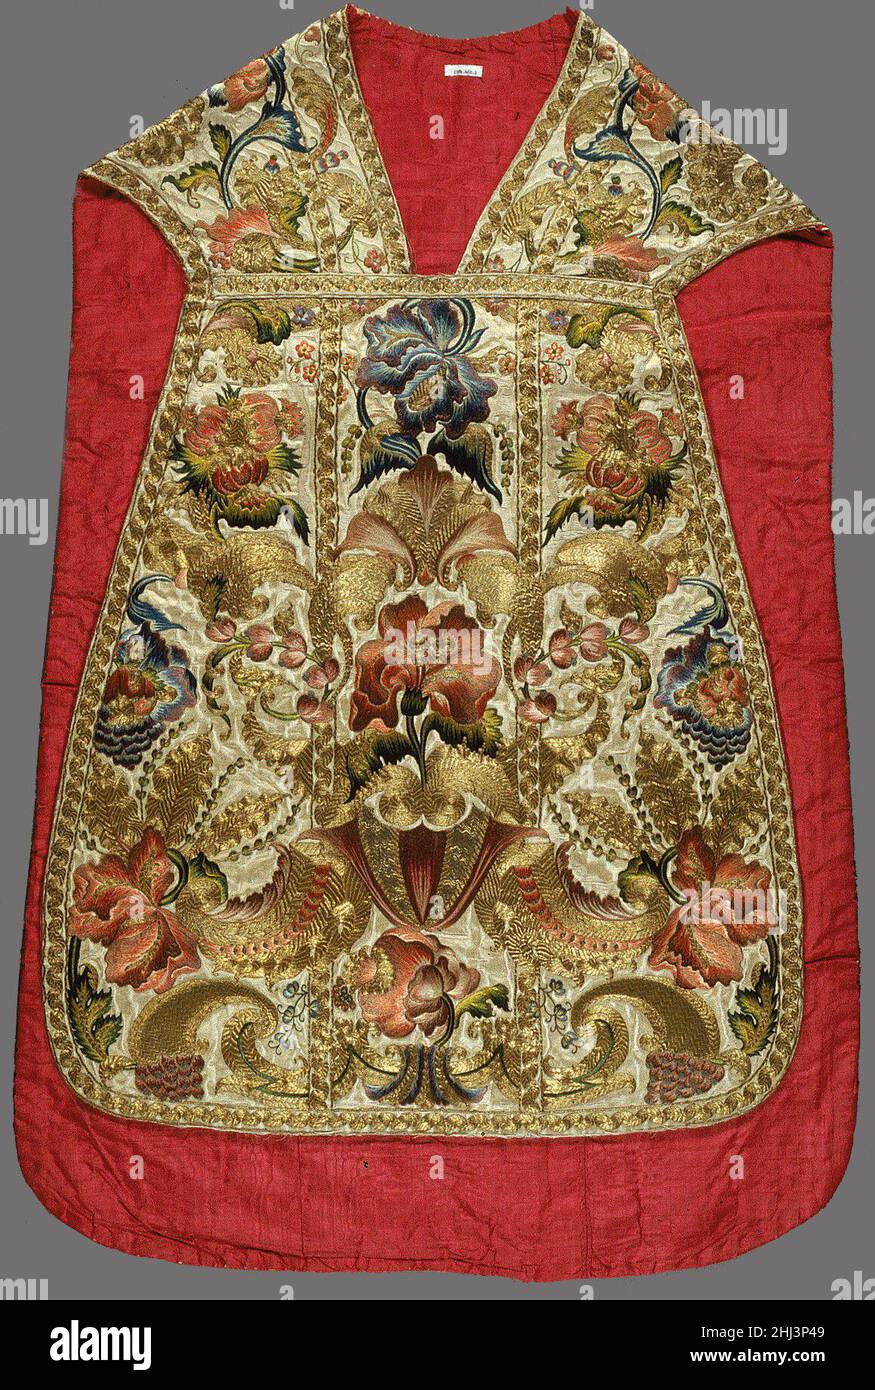 Chasuble (one of a set of five vestments) 18th century Italian, probably Sicily This chasuble is from a set of six vestments—also including a stole, maniple, burse, chalice veil, and chalice cover—whose quality, extent, and provenance make the group an important addition to the Museum's fine collection of ecclesiastical costume. The chasuble's embroidered decoration-a nearly symmetrical pattern of full-blown, seminaturalistic flowers, small blossoms, curving leaves, and scrolls—is an excellent example of the style of late Baroque ornament used to embellish Italian vestments from the end of the Stock Photo